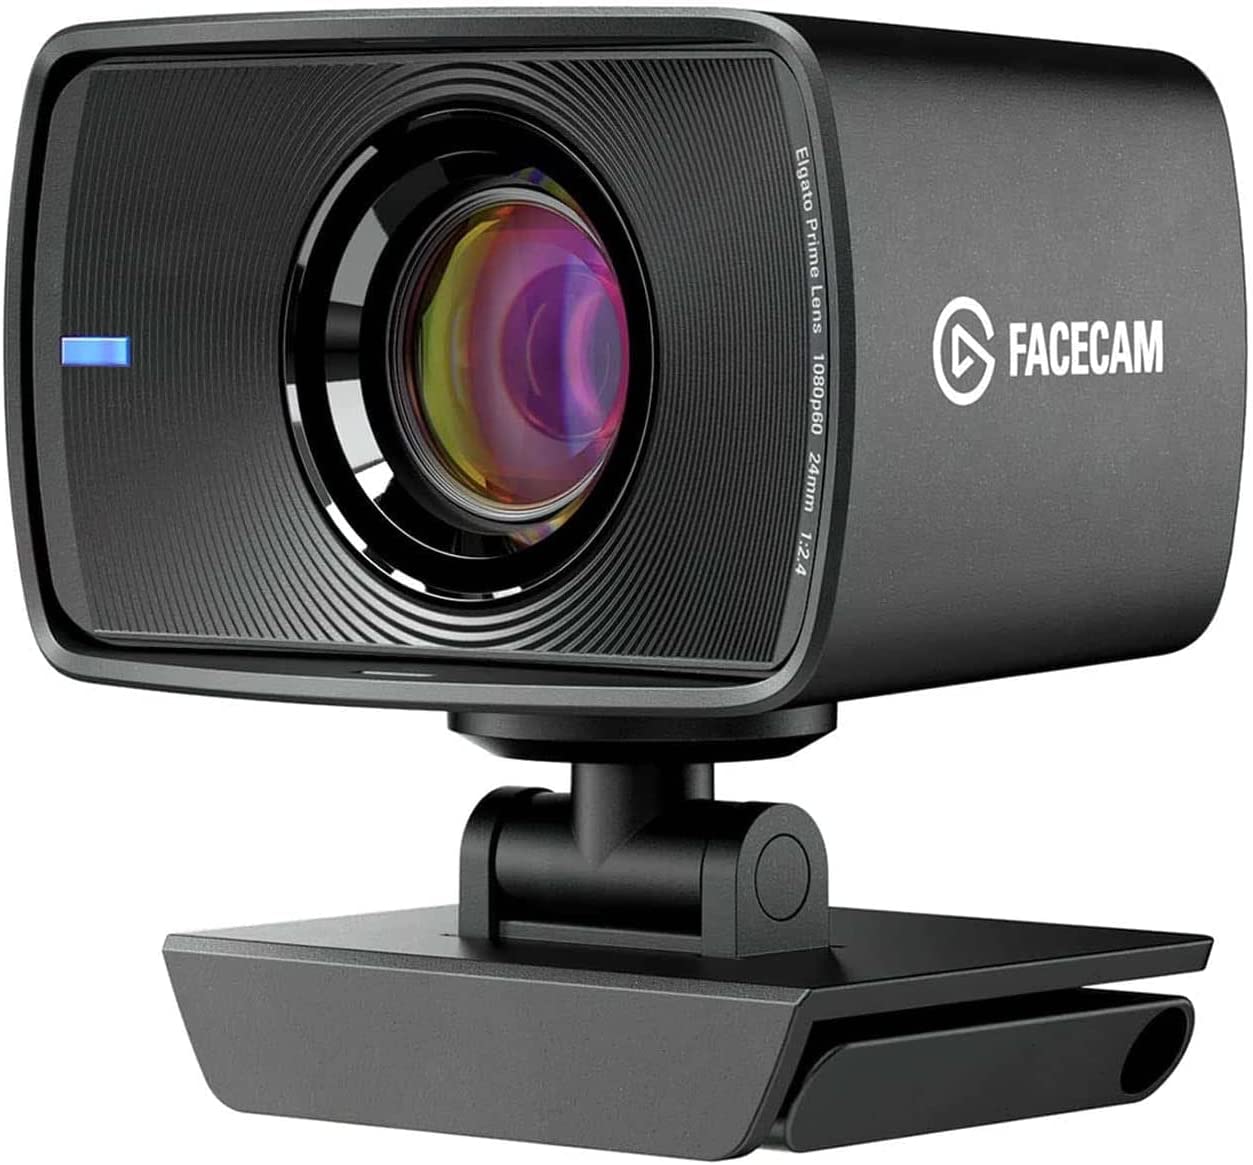 Facecam features professional-grade lenses and cutting-edge image sensors. High-speed circuitry outputs uncompressed 1080p60 video without artifacts. Application control and onboard memory recall image settings on all computers. An up to 82-degree field of view lets you frame shots or reveal your surroundings, while a fixed focus range ensures you're always in sharp focus. Optimized for indoor use, the premium SONY® STARVIS™ CMOS sensor enables Facecam to capture extraordinary detail with minimal noise. So wherever you are on Twitch, YouTube, Zoom and more - it will look great in all lighting conditions.